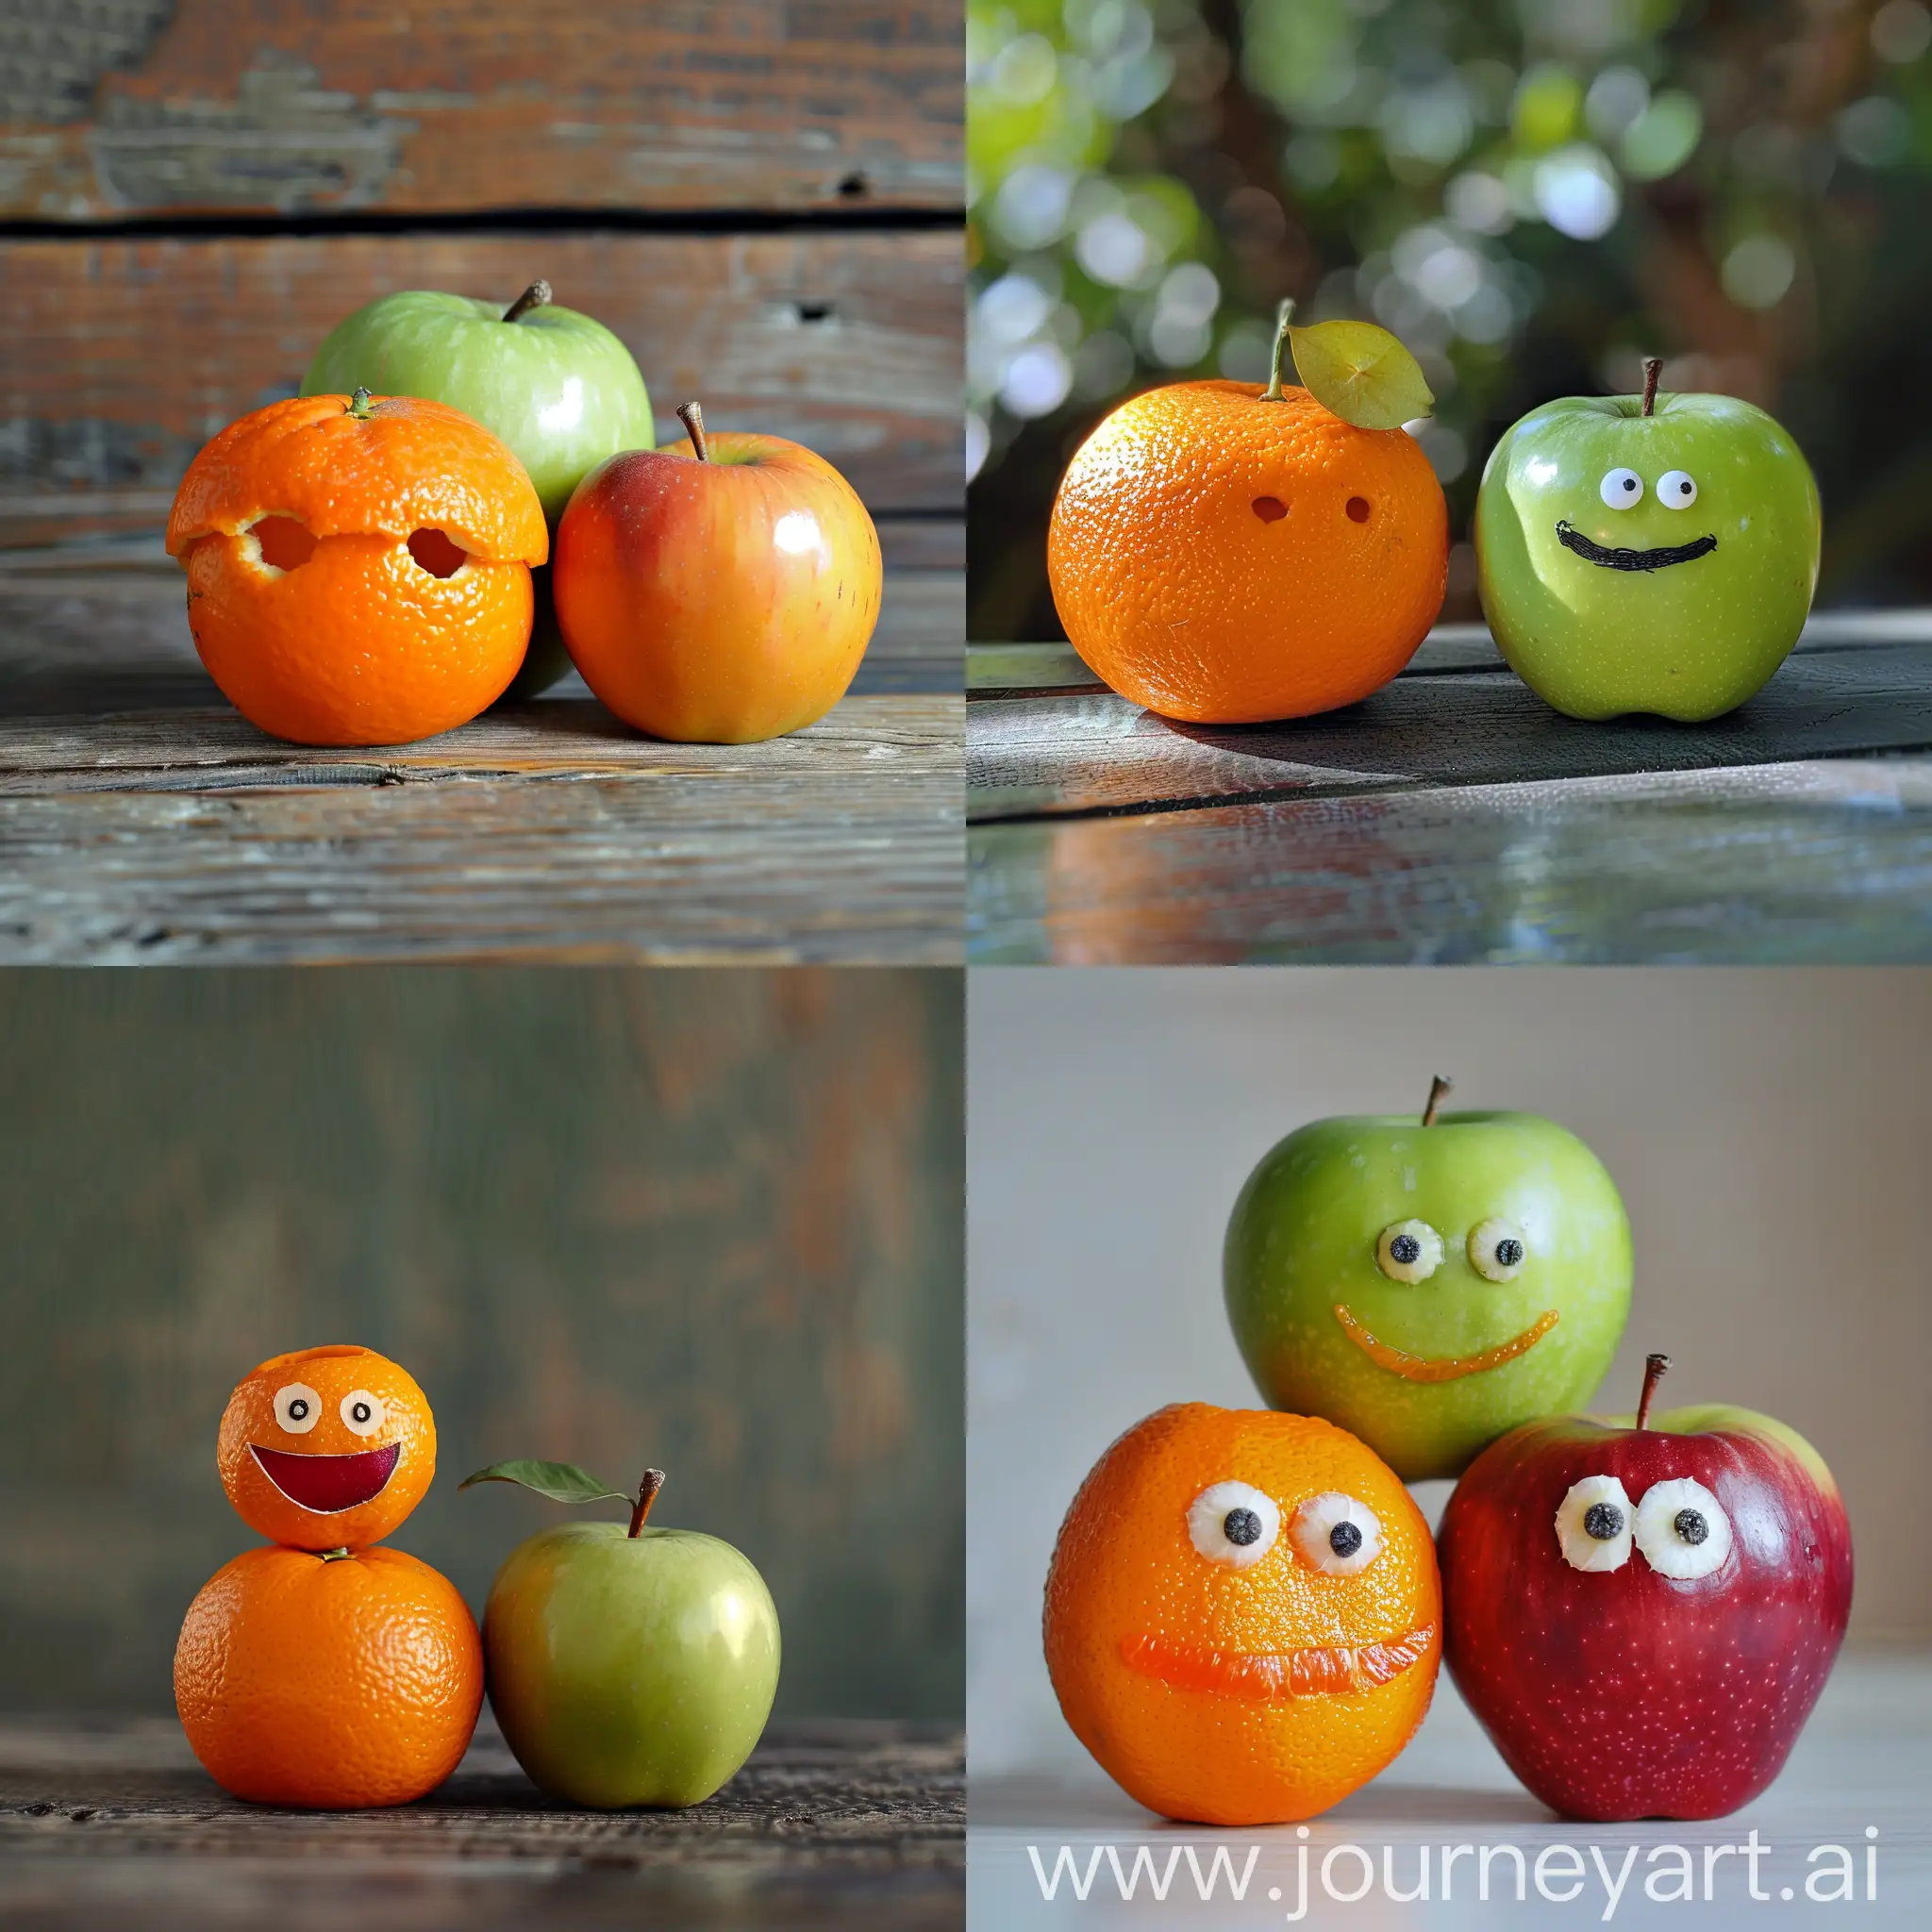 Fruitful-Family-Orange-Dad-and-Apple-Mom-in-a-Vibrant-Kitchen